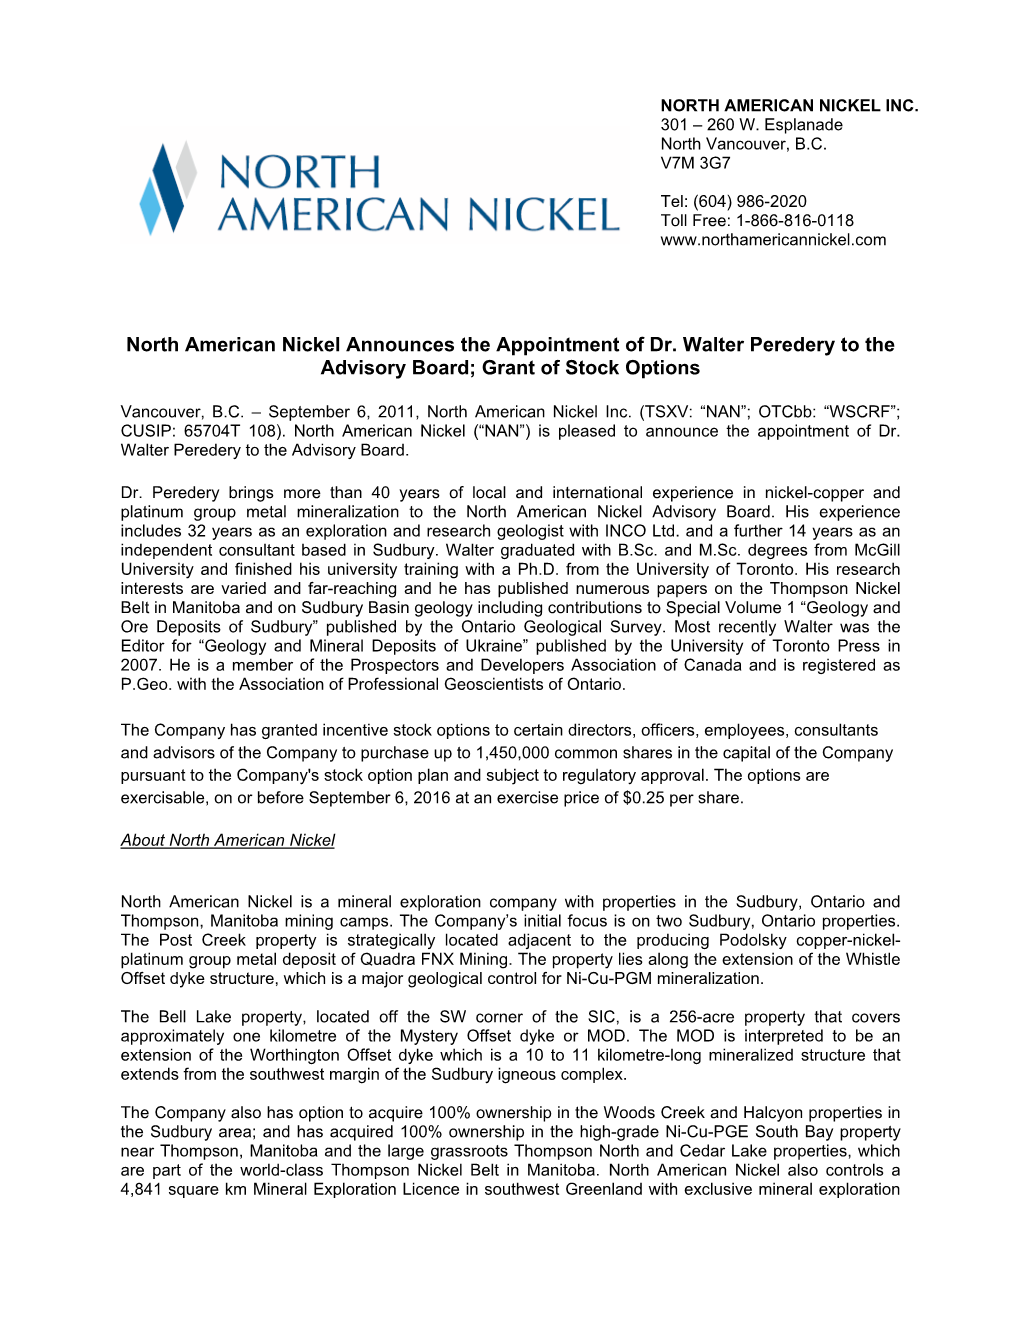 North American Nickel Announces the Appointment of Dr. Walter Peredery to the Advisory Board; Grant of Stock Options